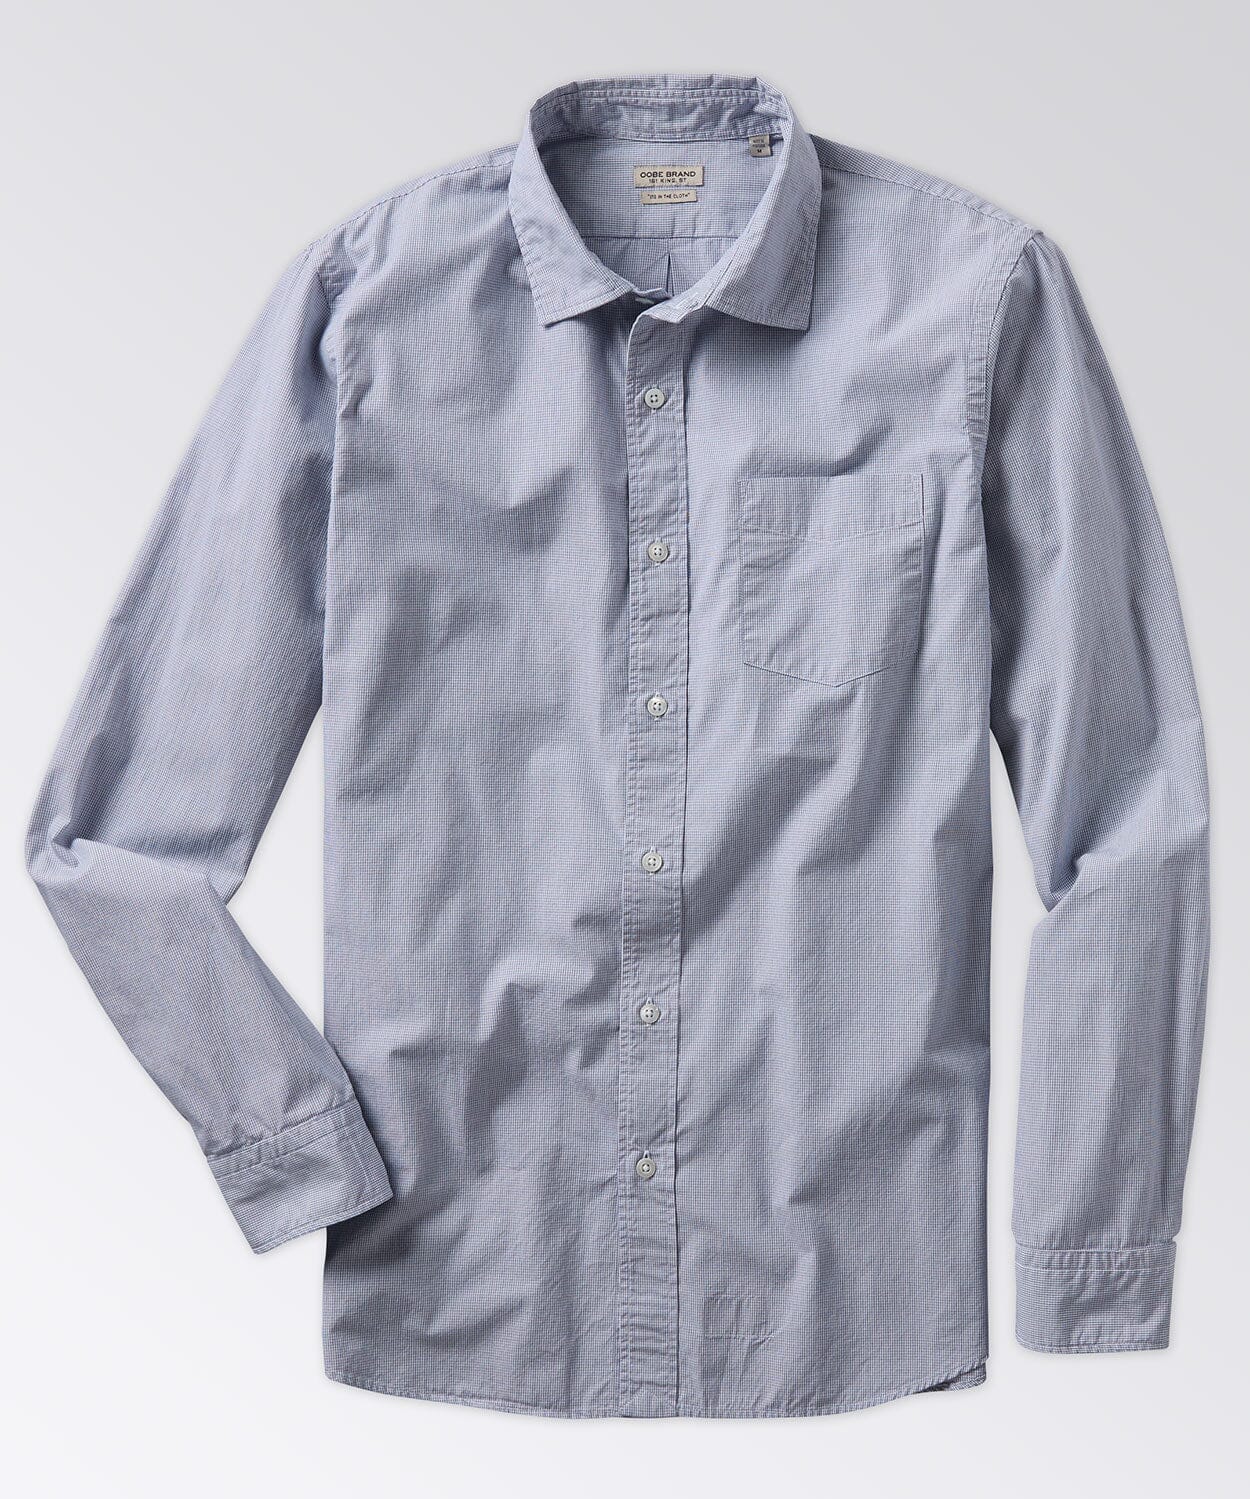 Excella Shirt Button Downs OOBE BRAND Navy White S 